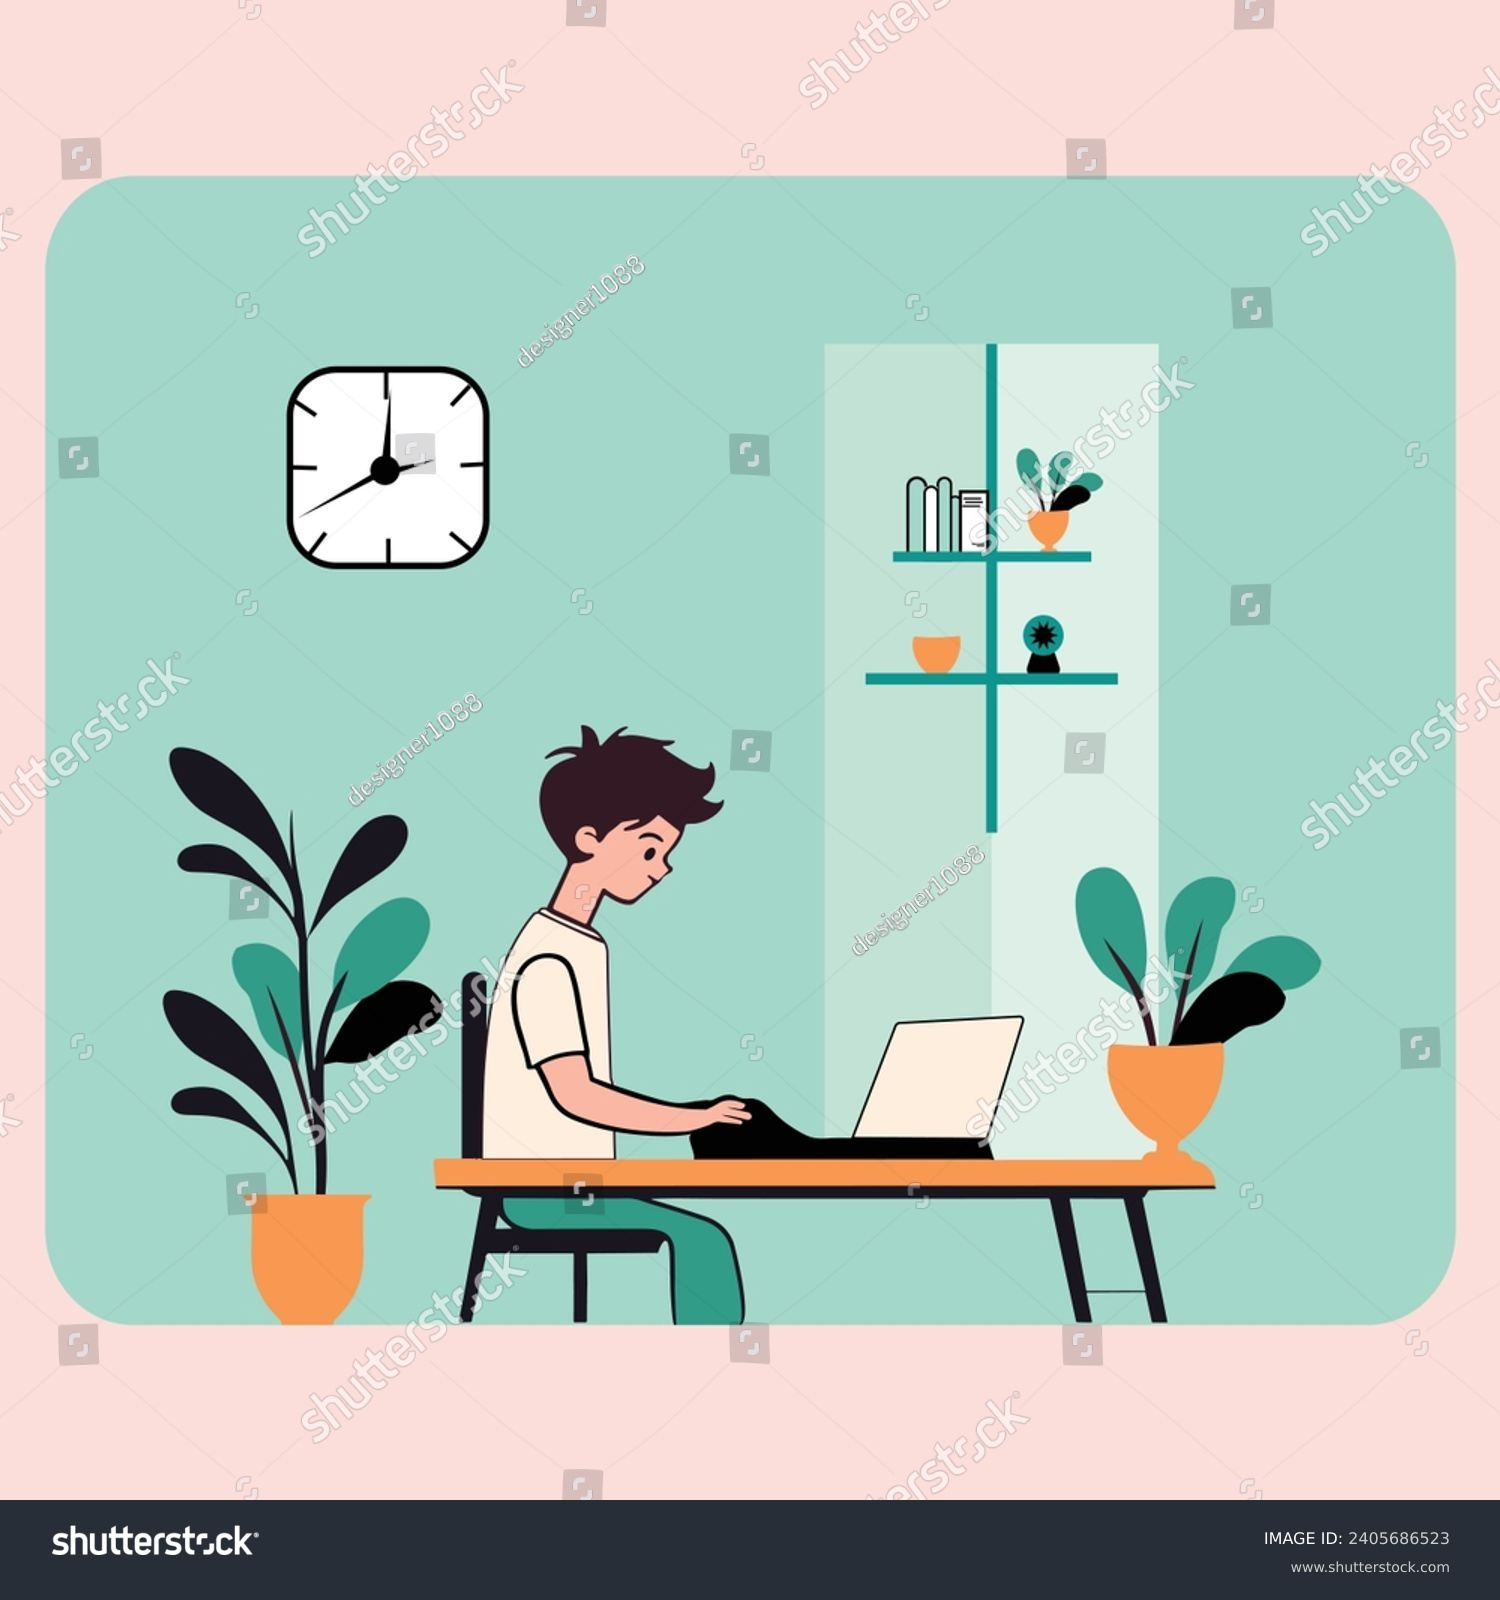 SVG of A cartoon boy working on laptop in a decorative room vector image design beautiful room vector illustration svg